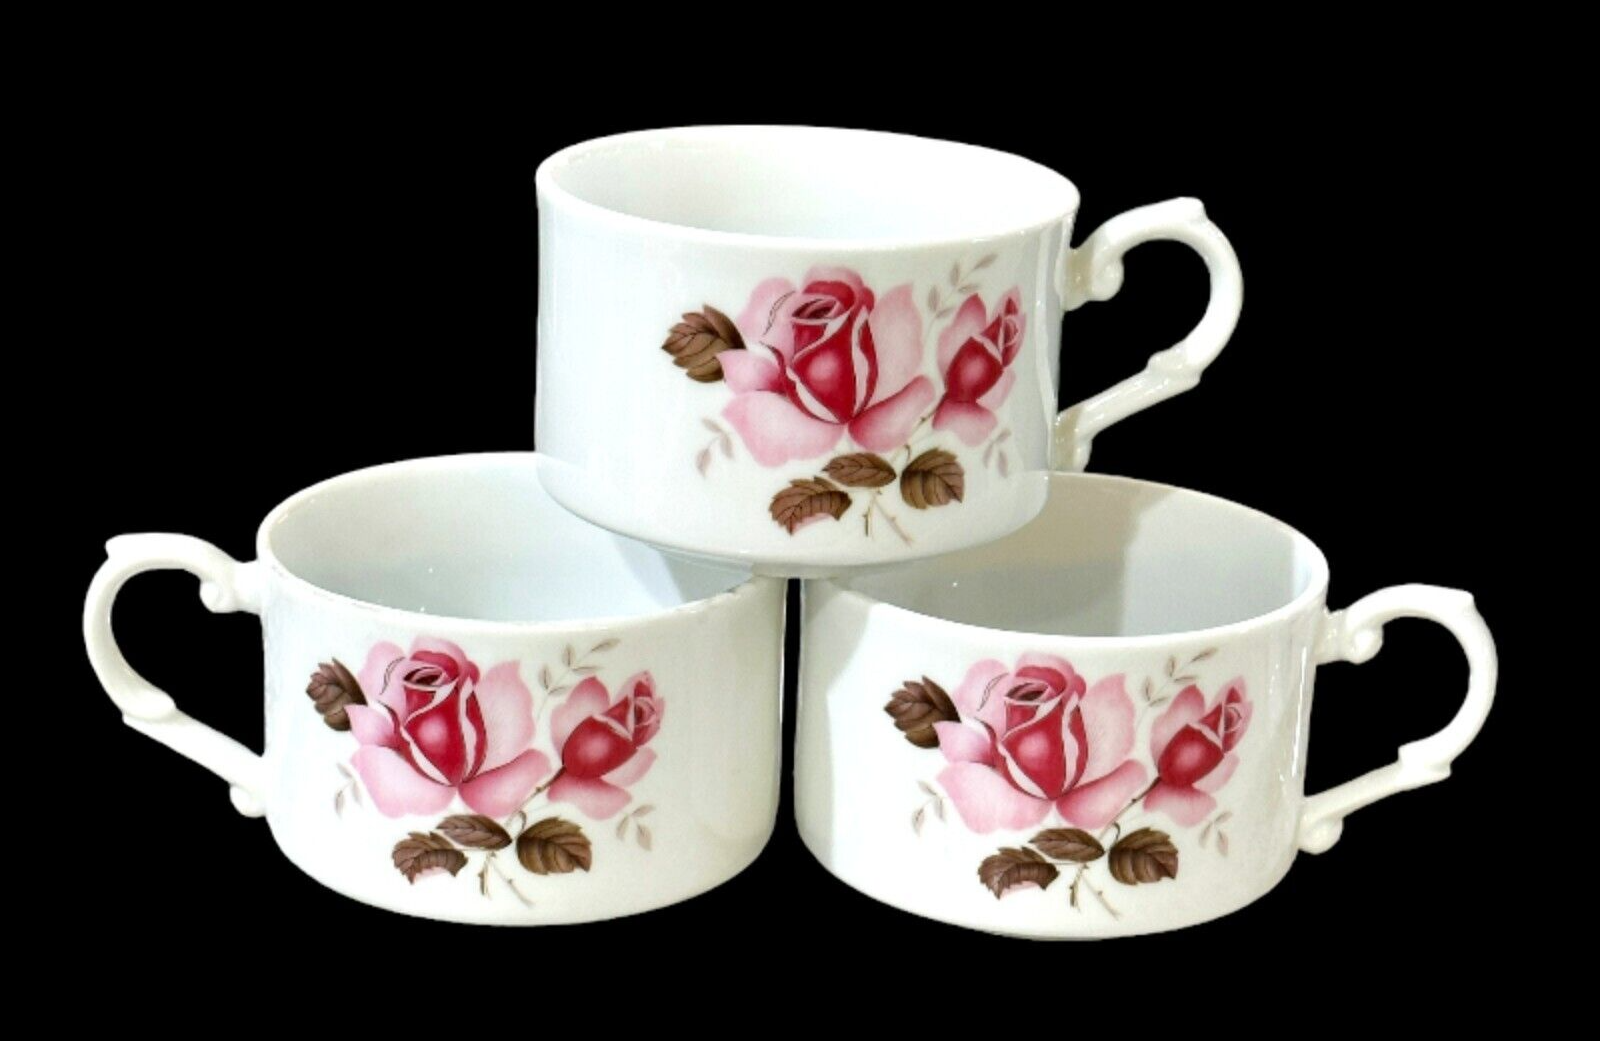 Primary image for 3 Contessa Pink Rose Coffee Mugs Cups Floral Cottagecore Shabby Chic JAPAN